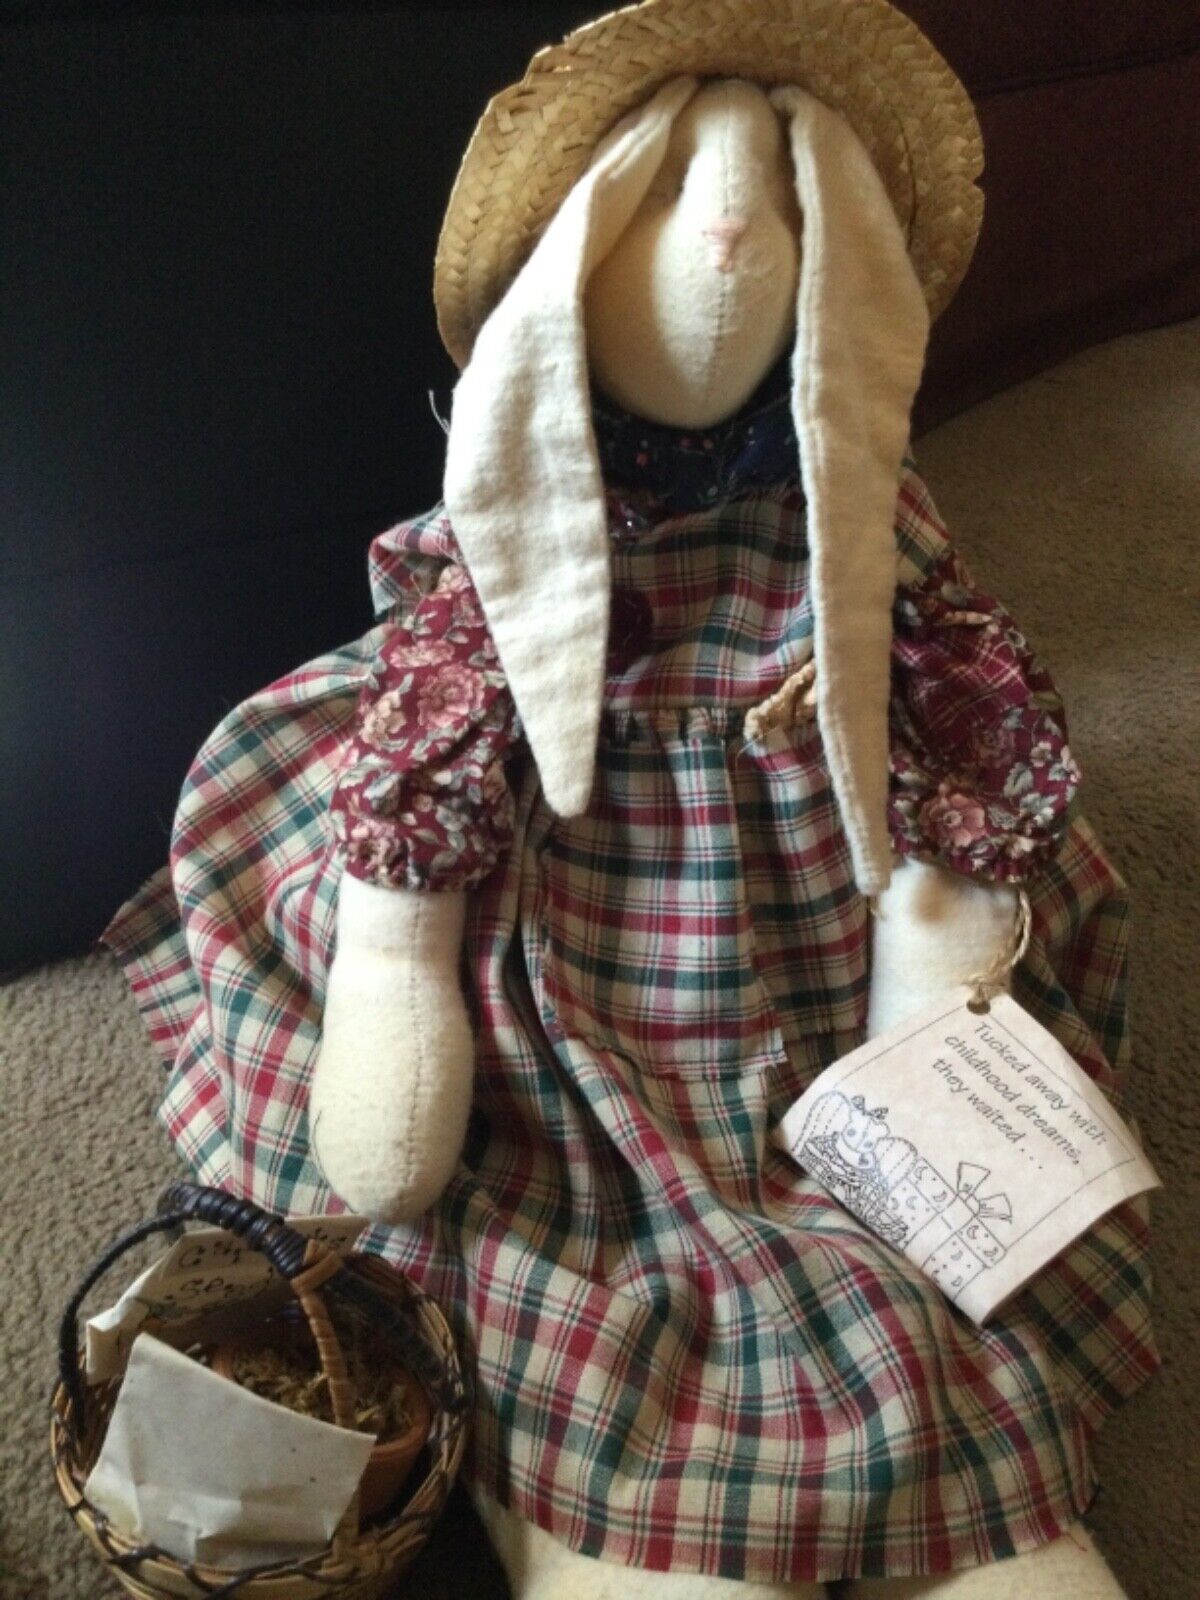 VIntage “RARE” Attic Babies Easter Bunny Rag Doll Collectible Item 